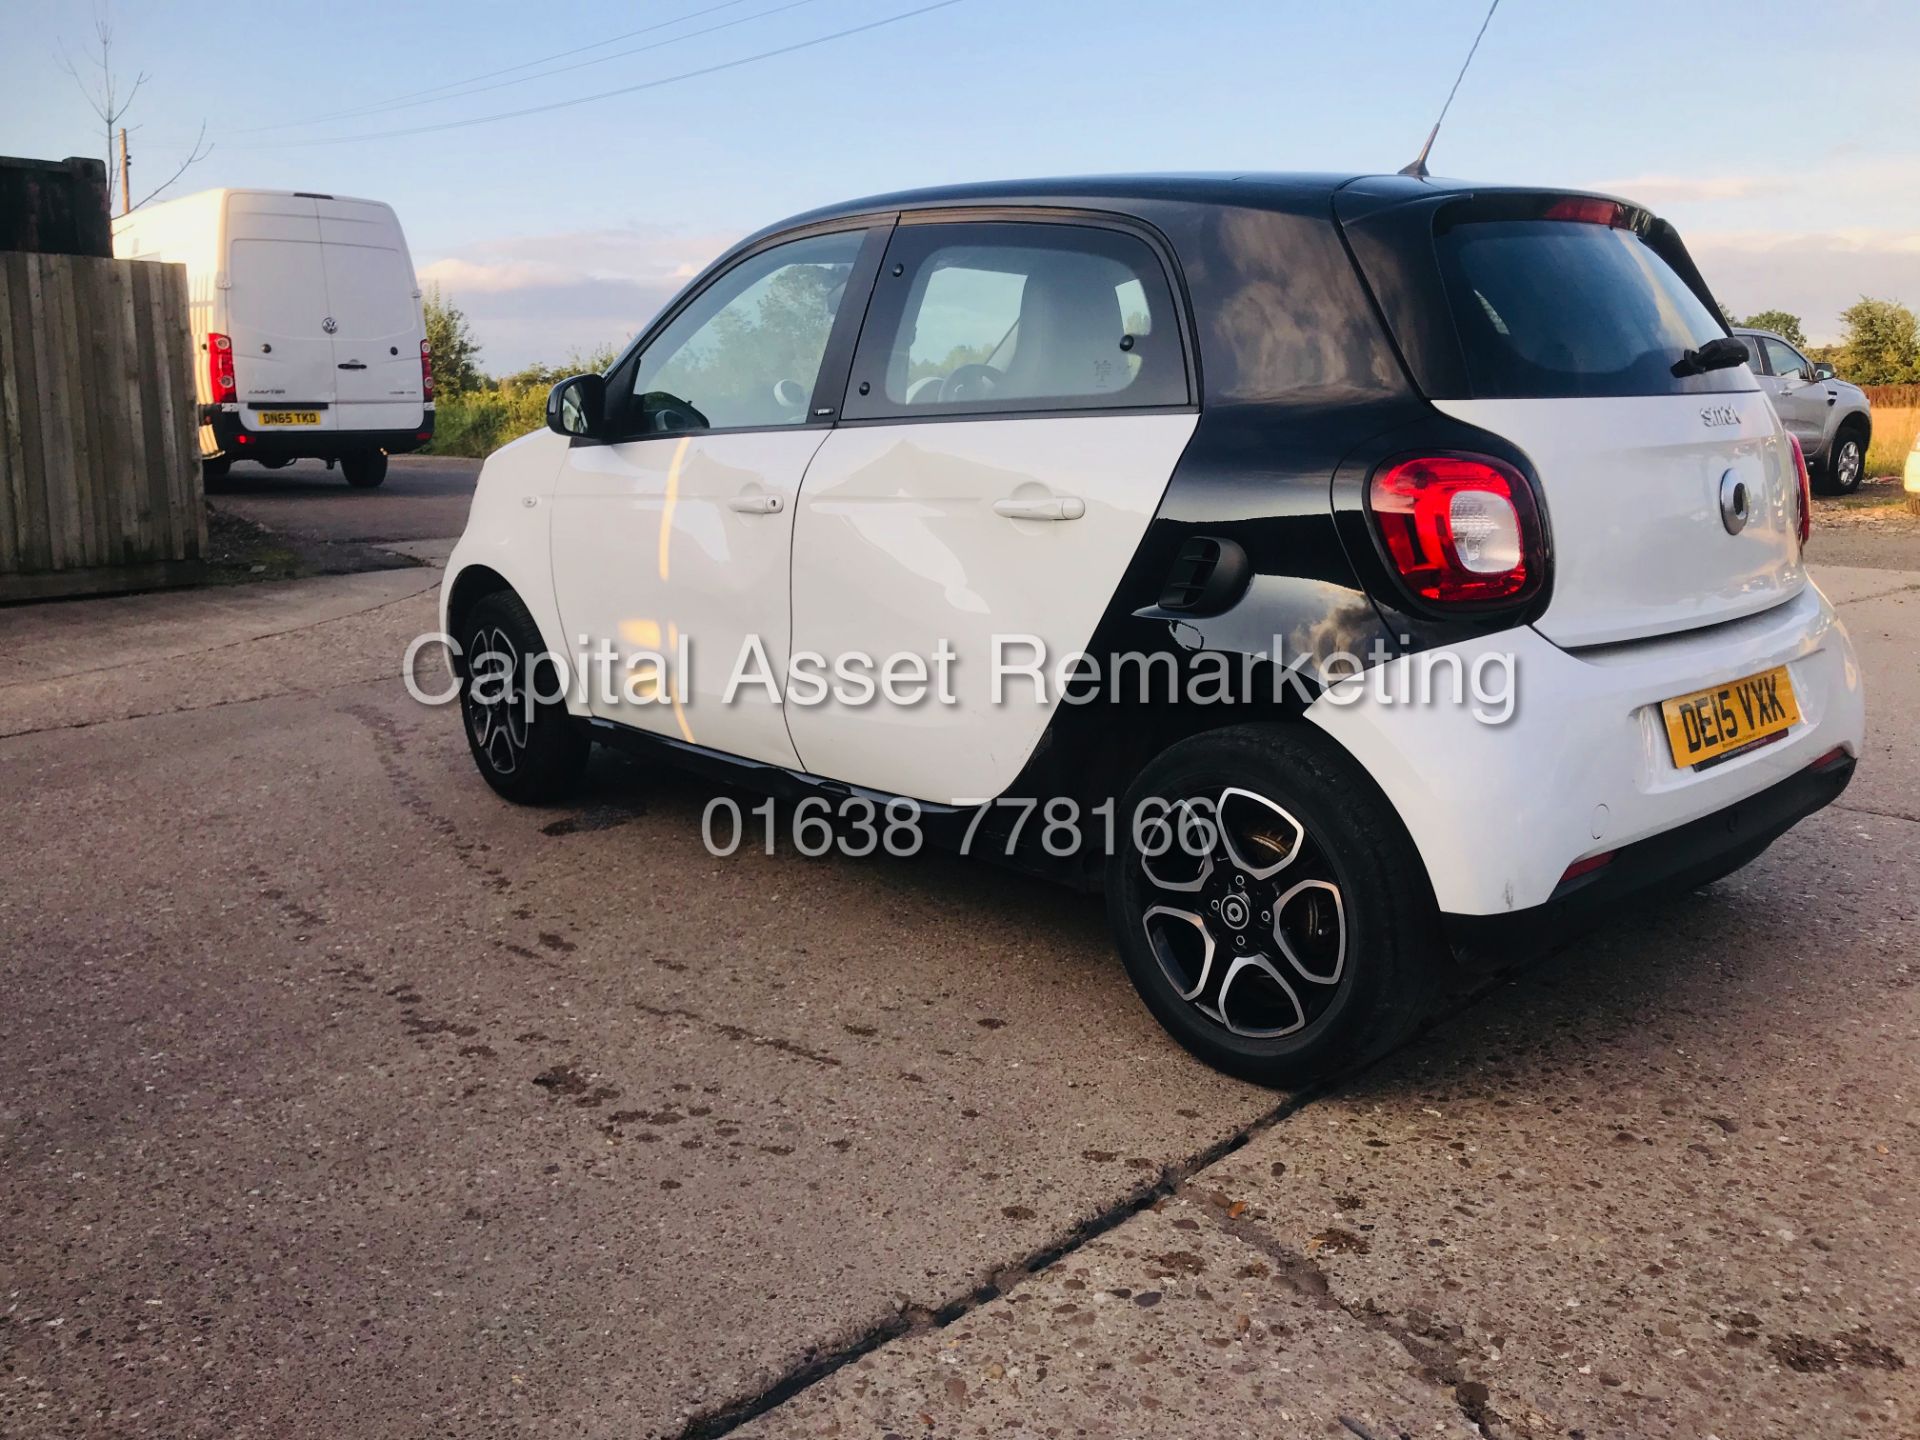 (On Sale)MERCEDES SMART FORFOUR "PRIME PREMIUM" 5 DR (15 REG - NEW) ONLY 30,000 MILES - CLIMATE & AC - Image 4 of 15